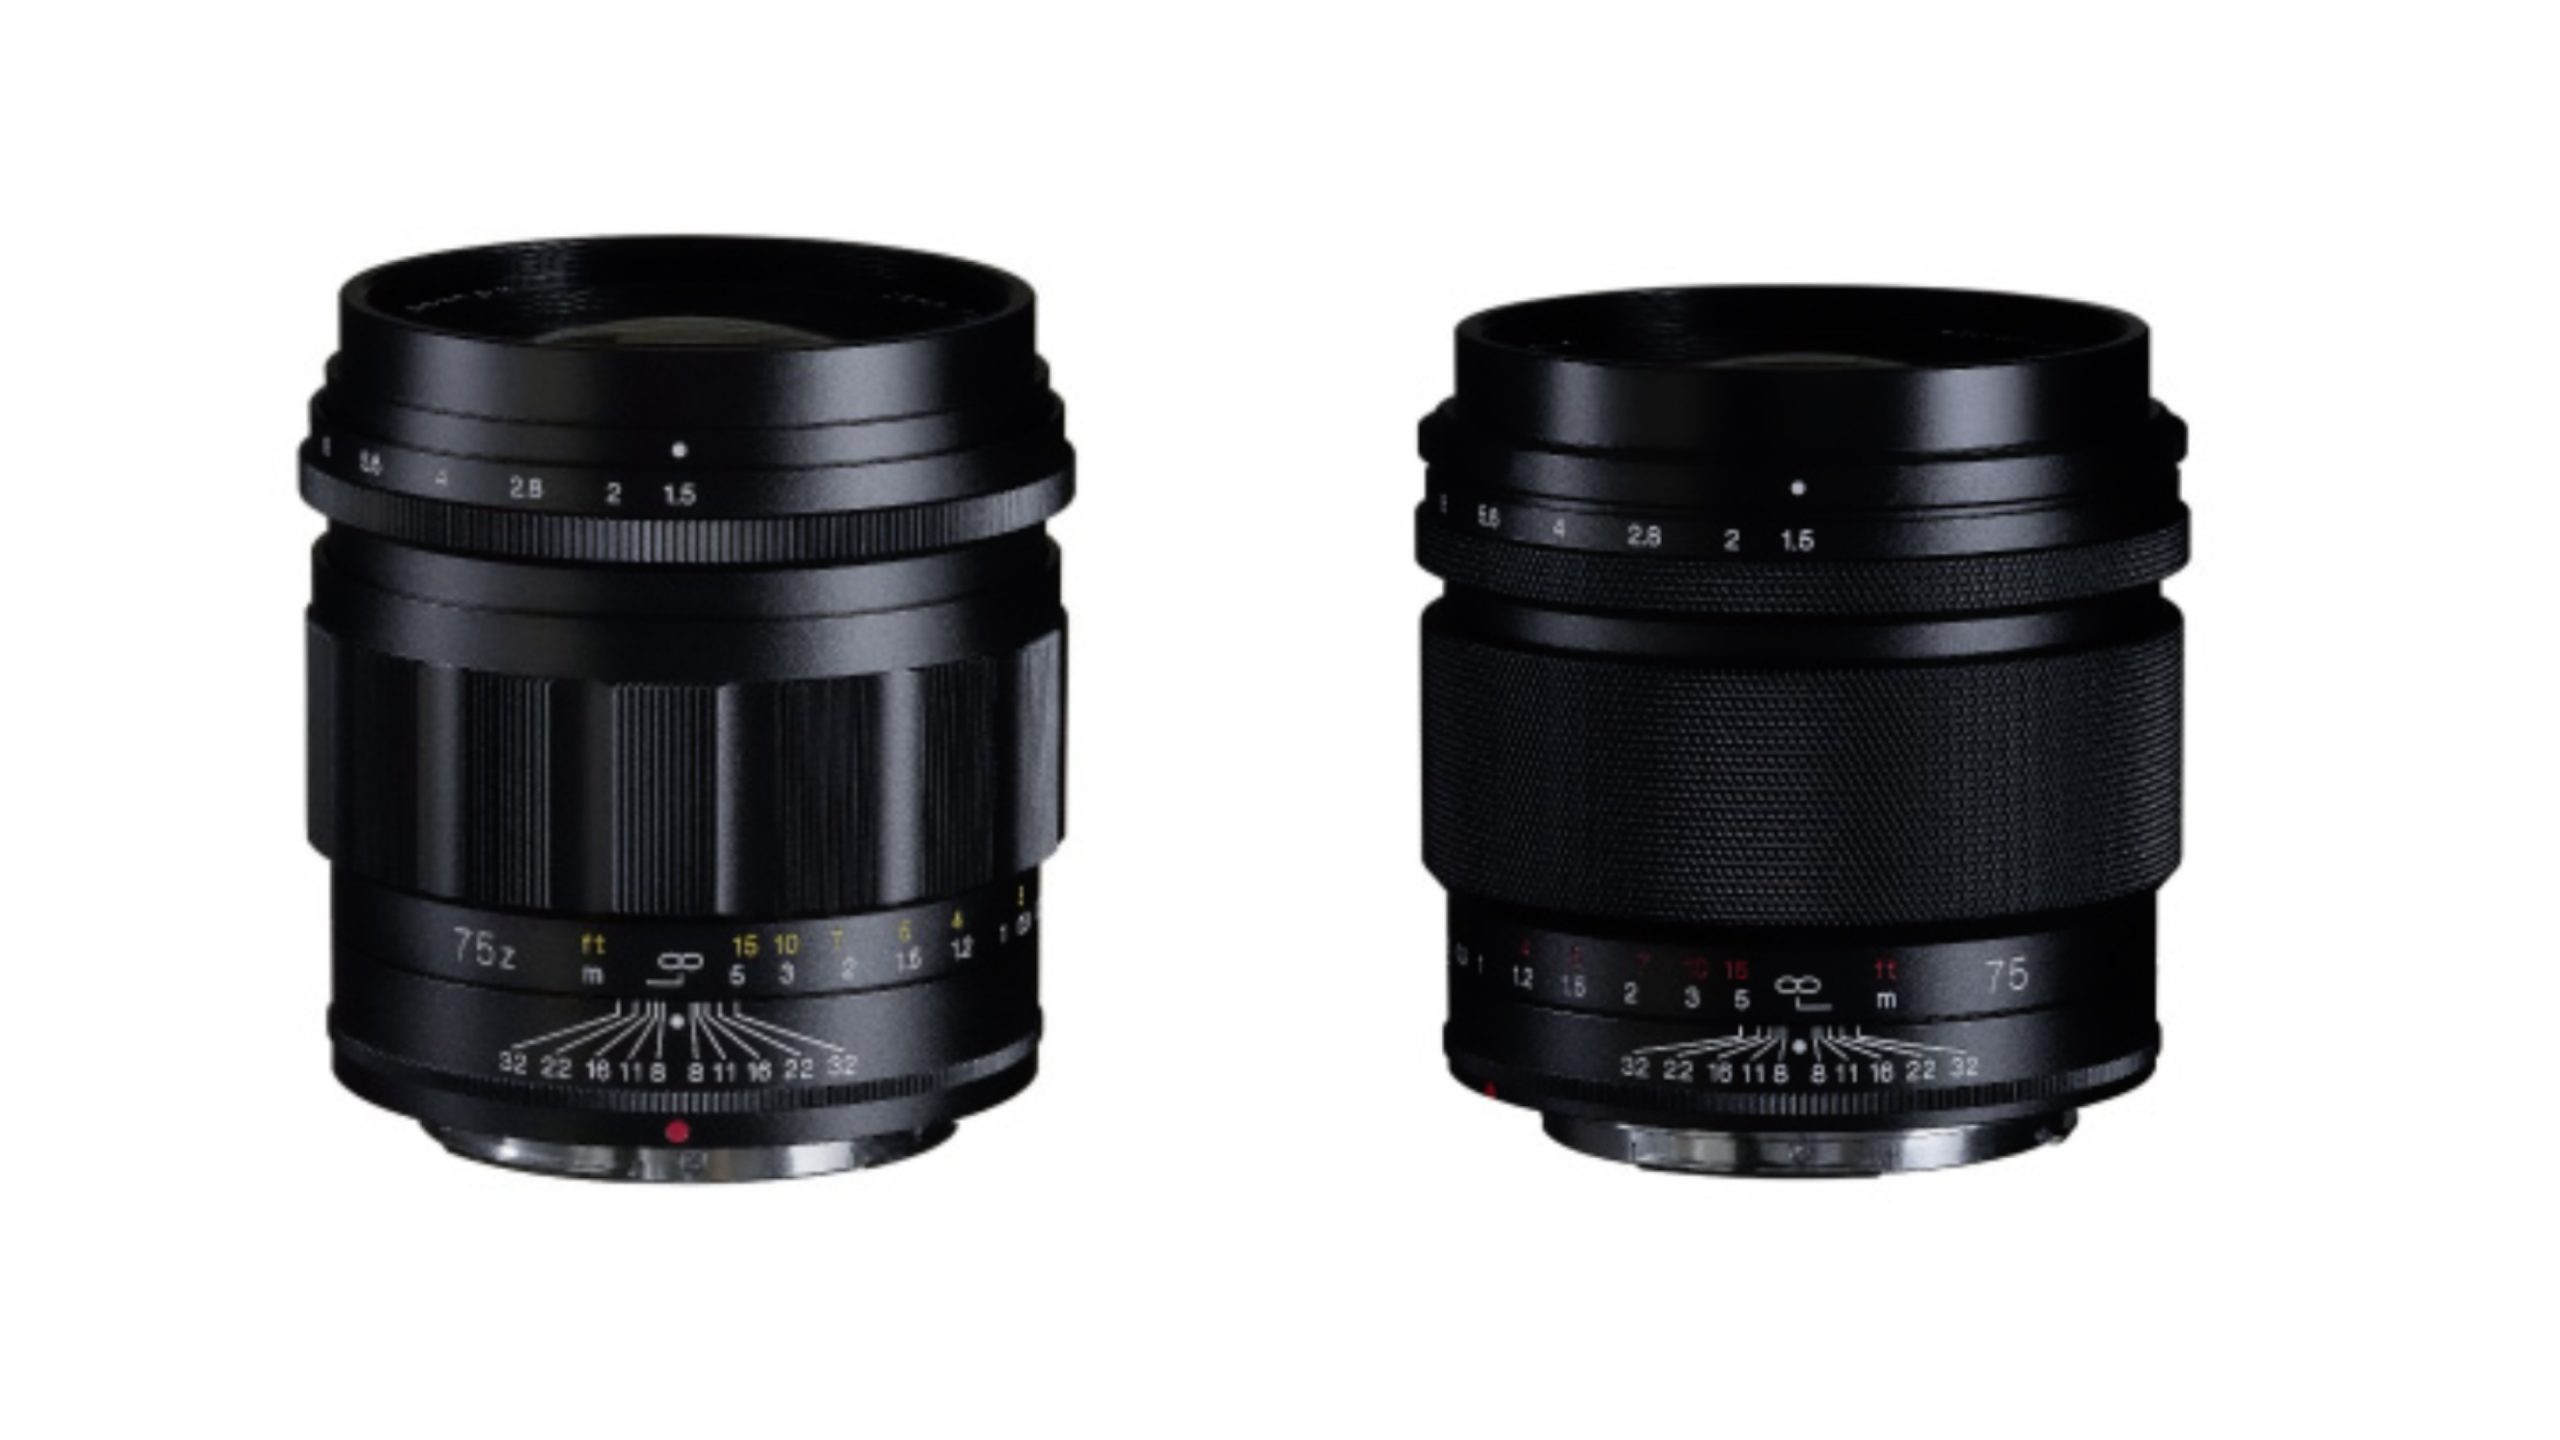 Voigtlander NOKTON 75mm F/1.5 Aspherical now available in mirrorless mounts  - Newsshooter